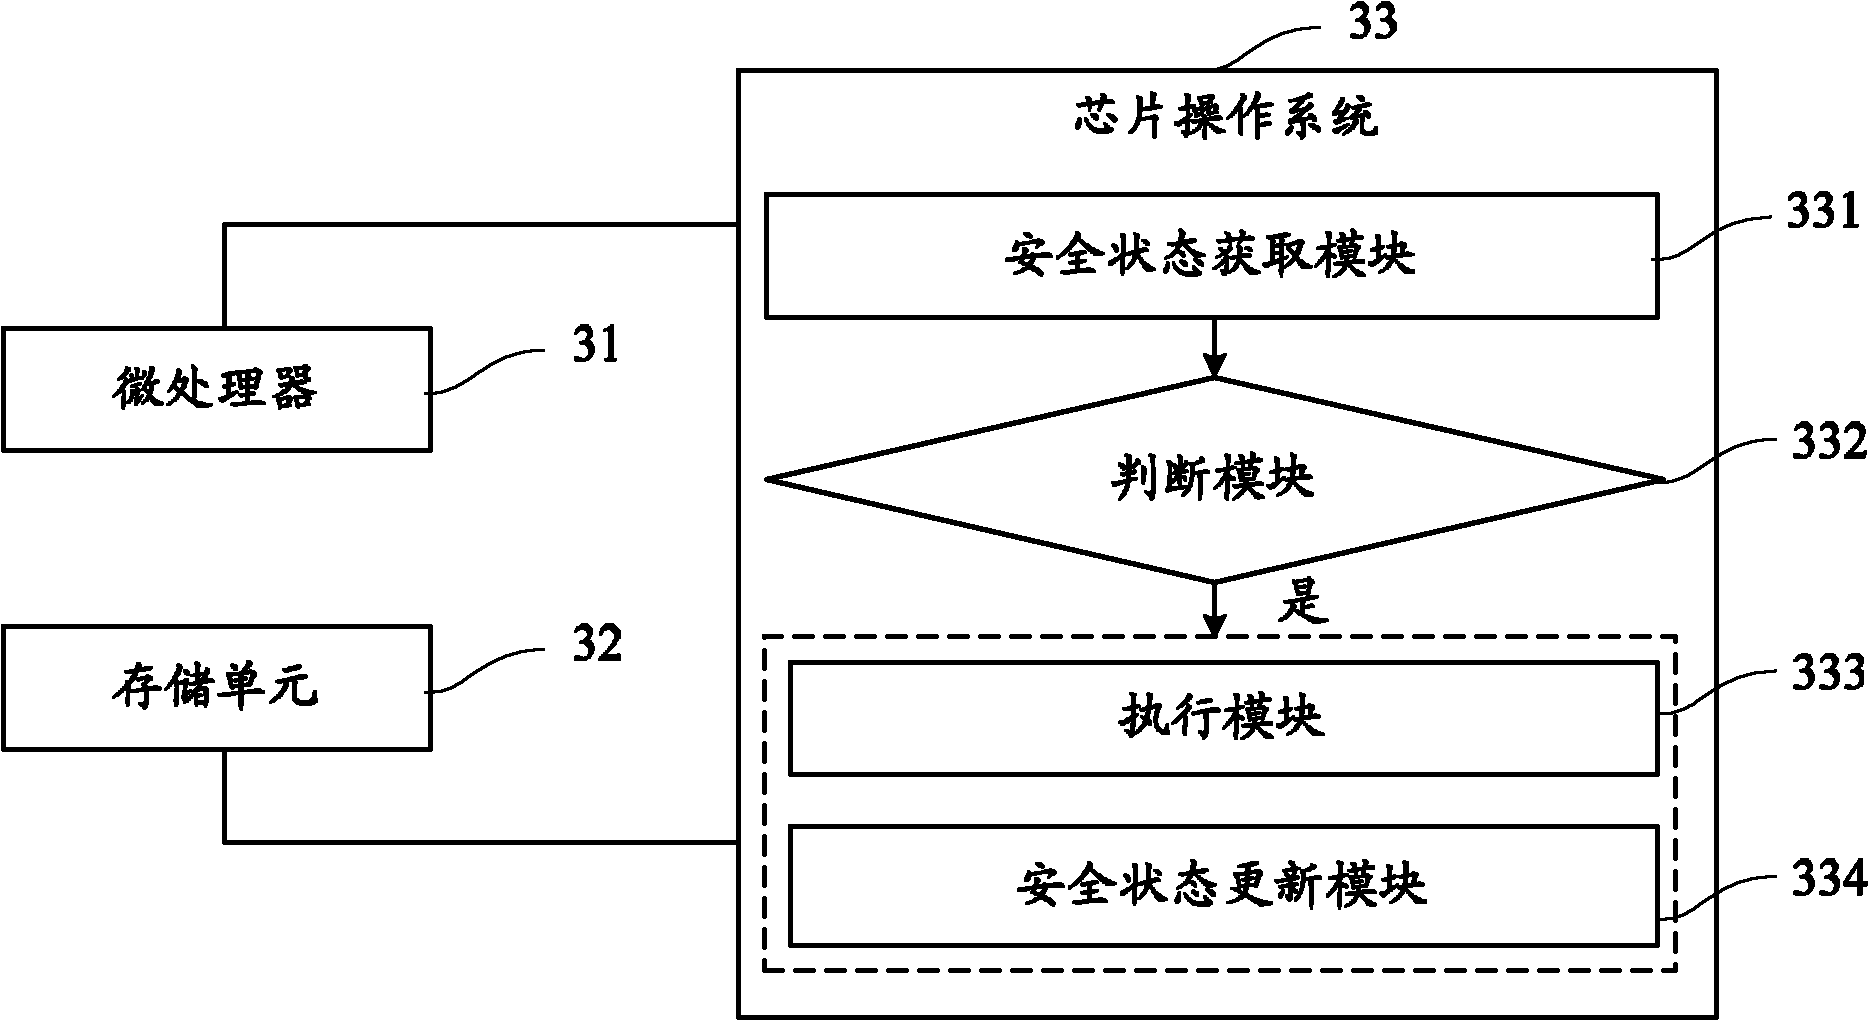 Method for checking operating authority of smart card and smart card